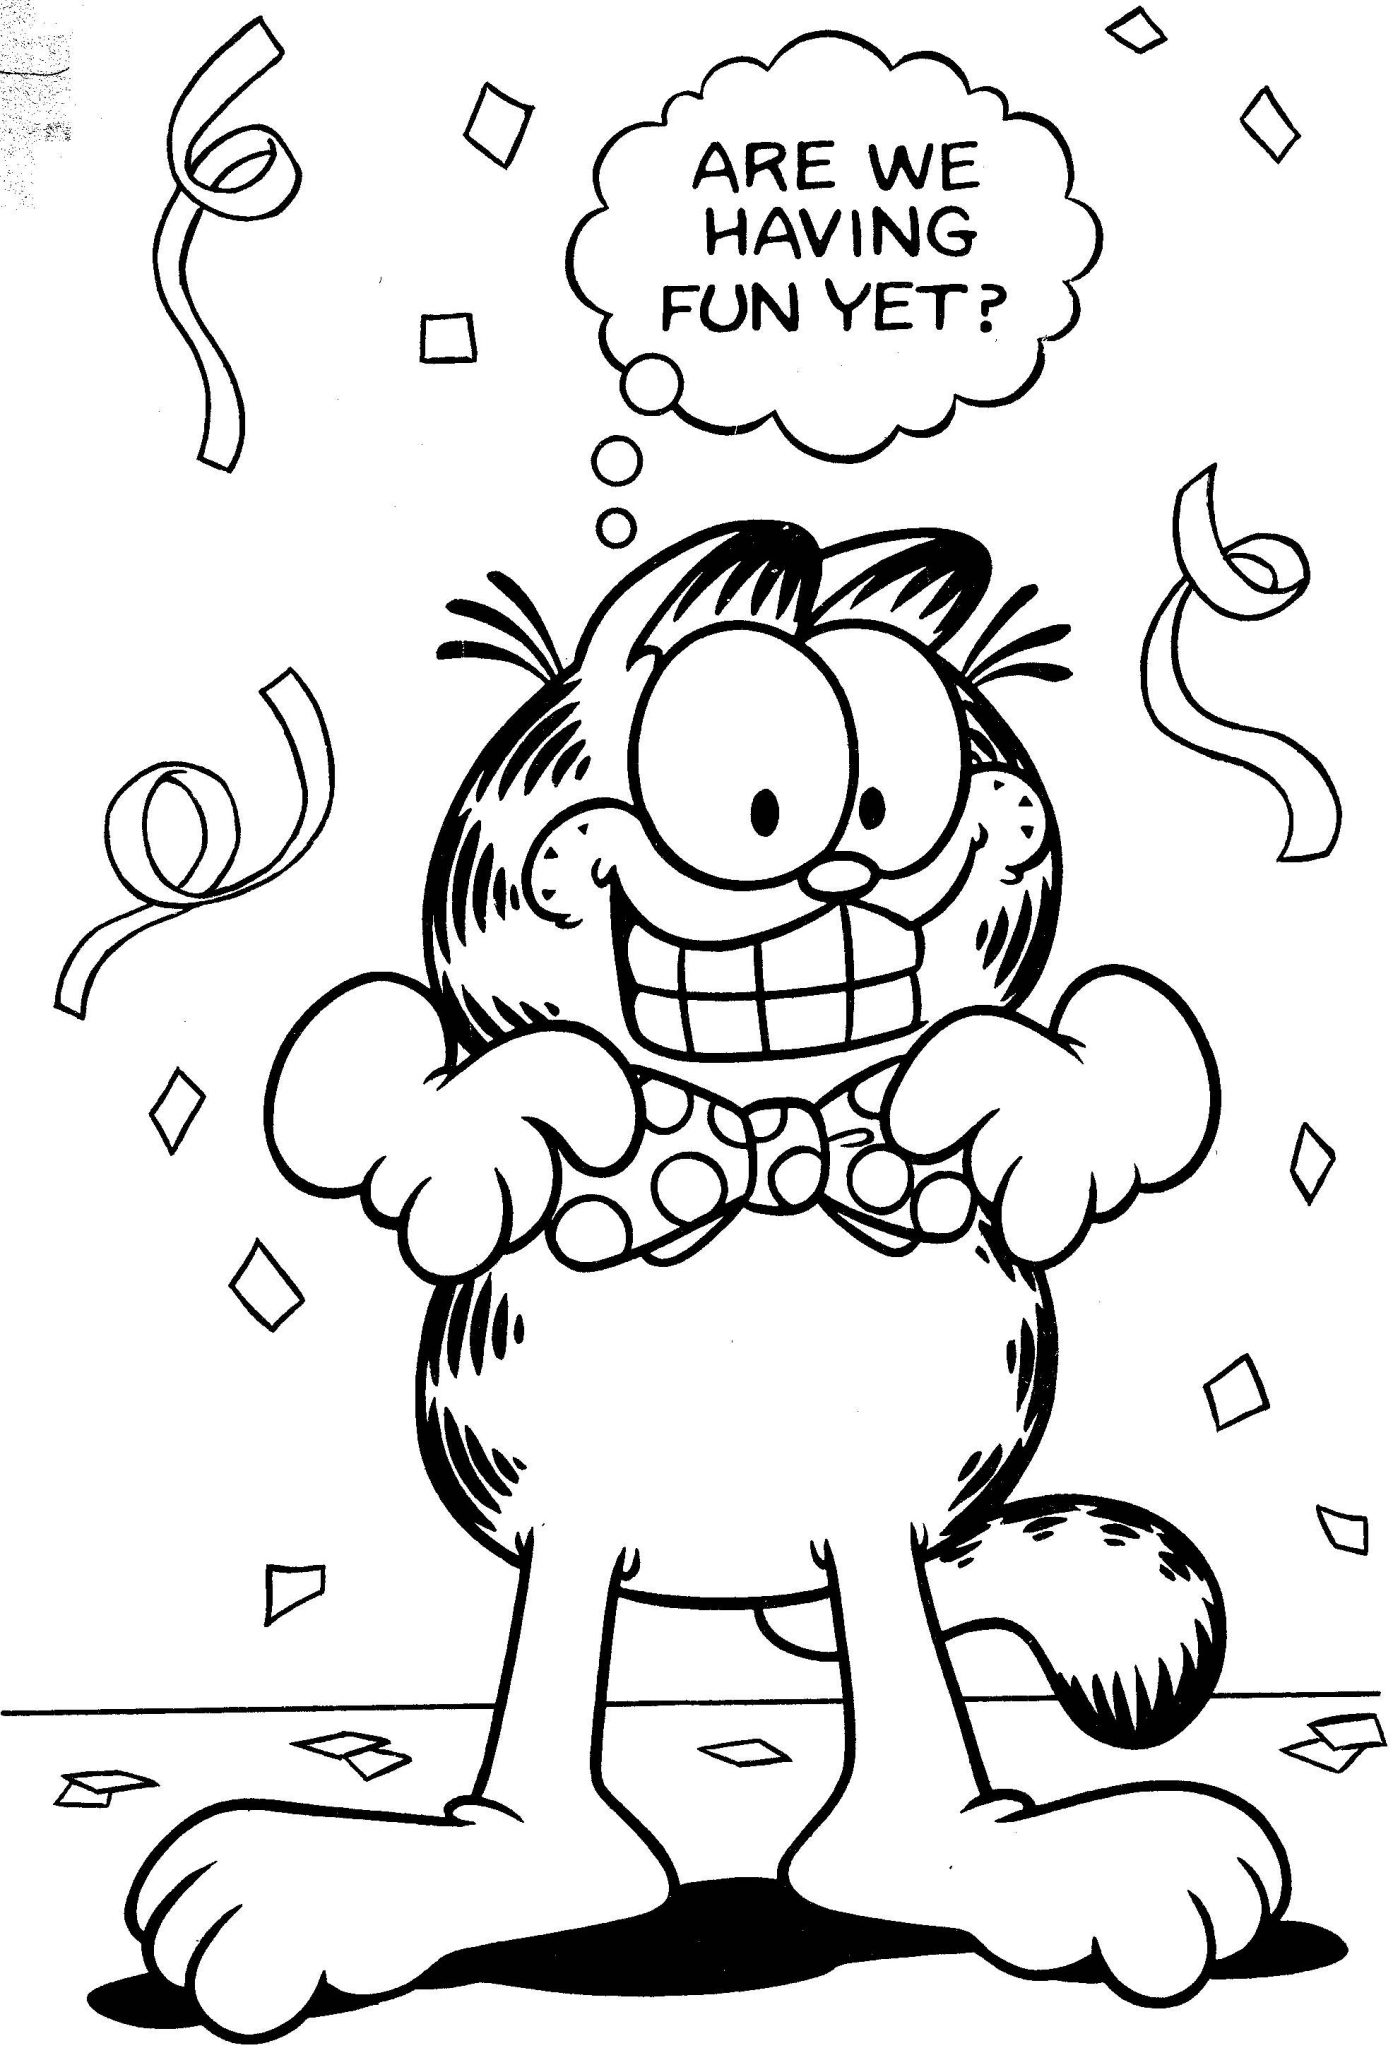 Free Fancy Garfield Coloring Pages Pictures printable